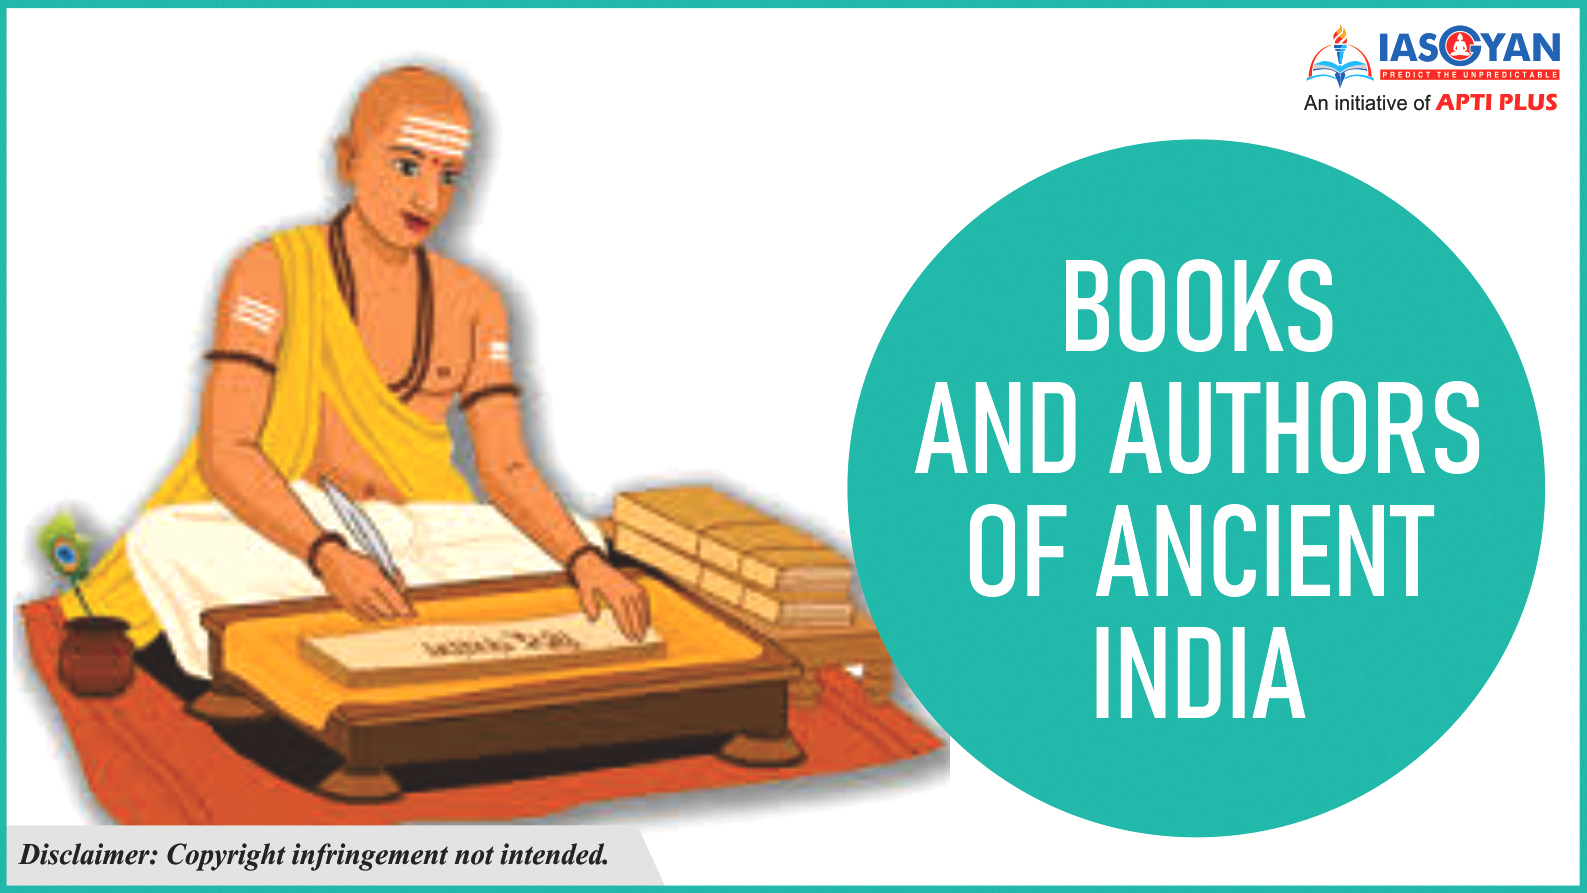 BOOKS AND AUTHORS OF ANCIENT INDIA